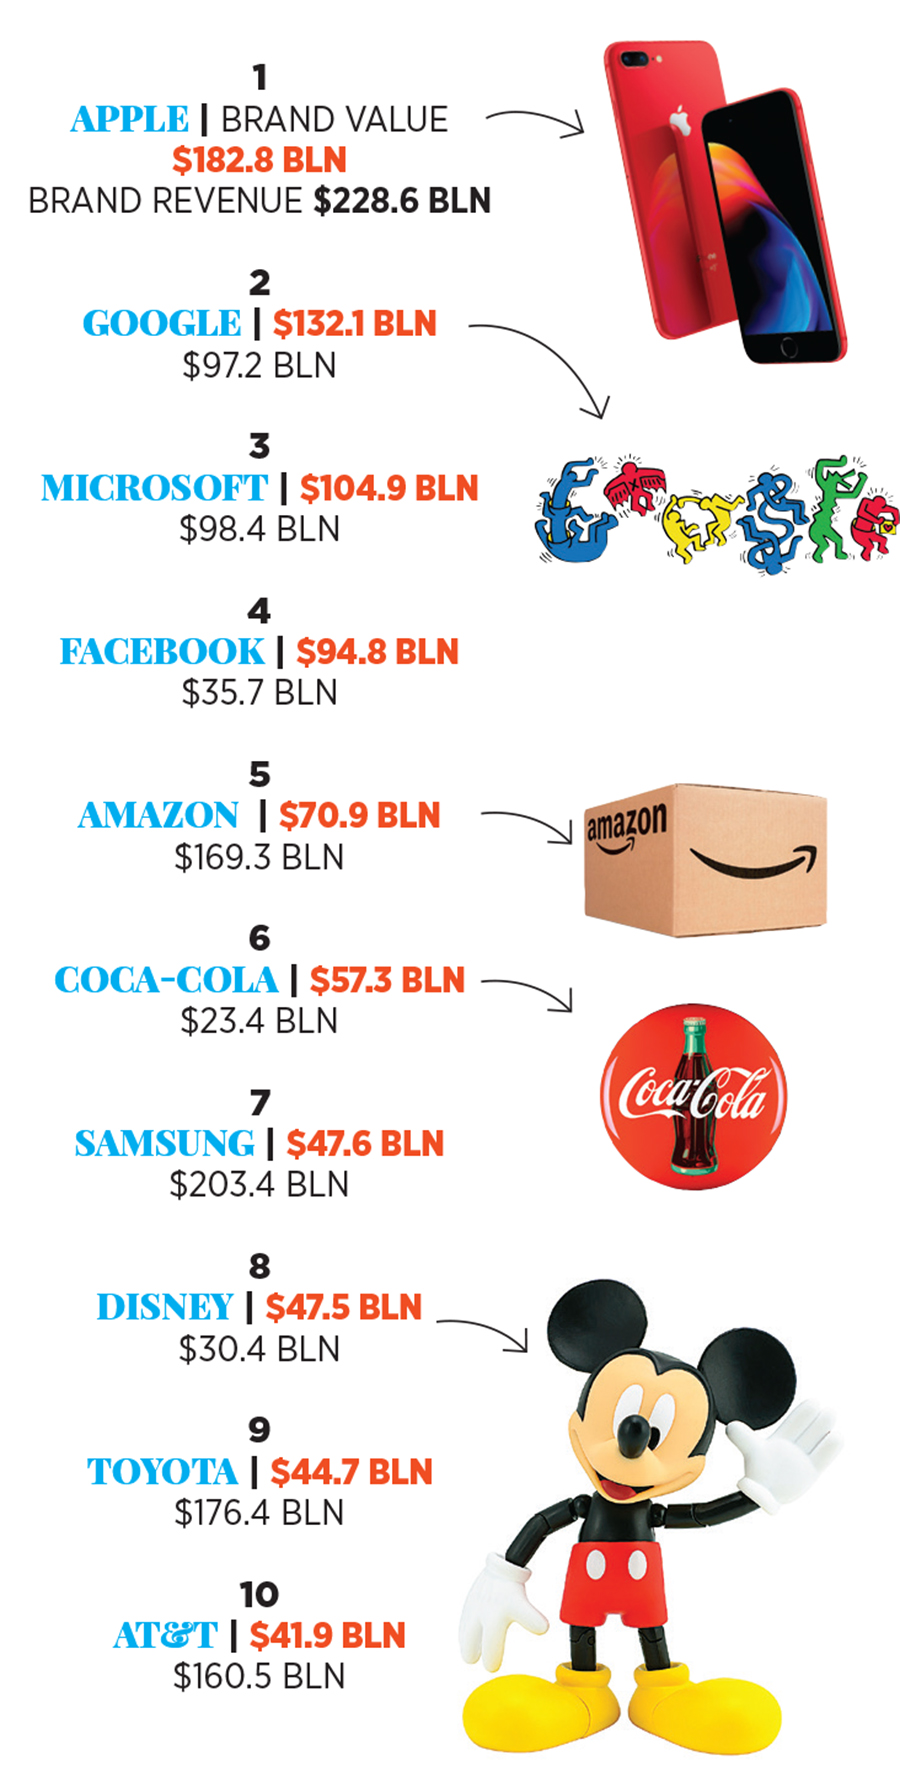 These are the world's most valuable brands